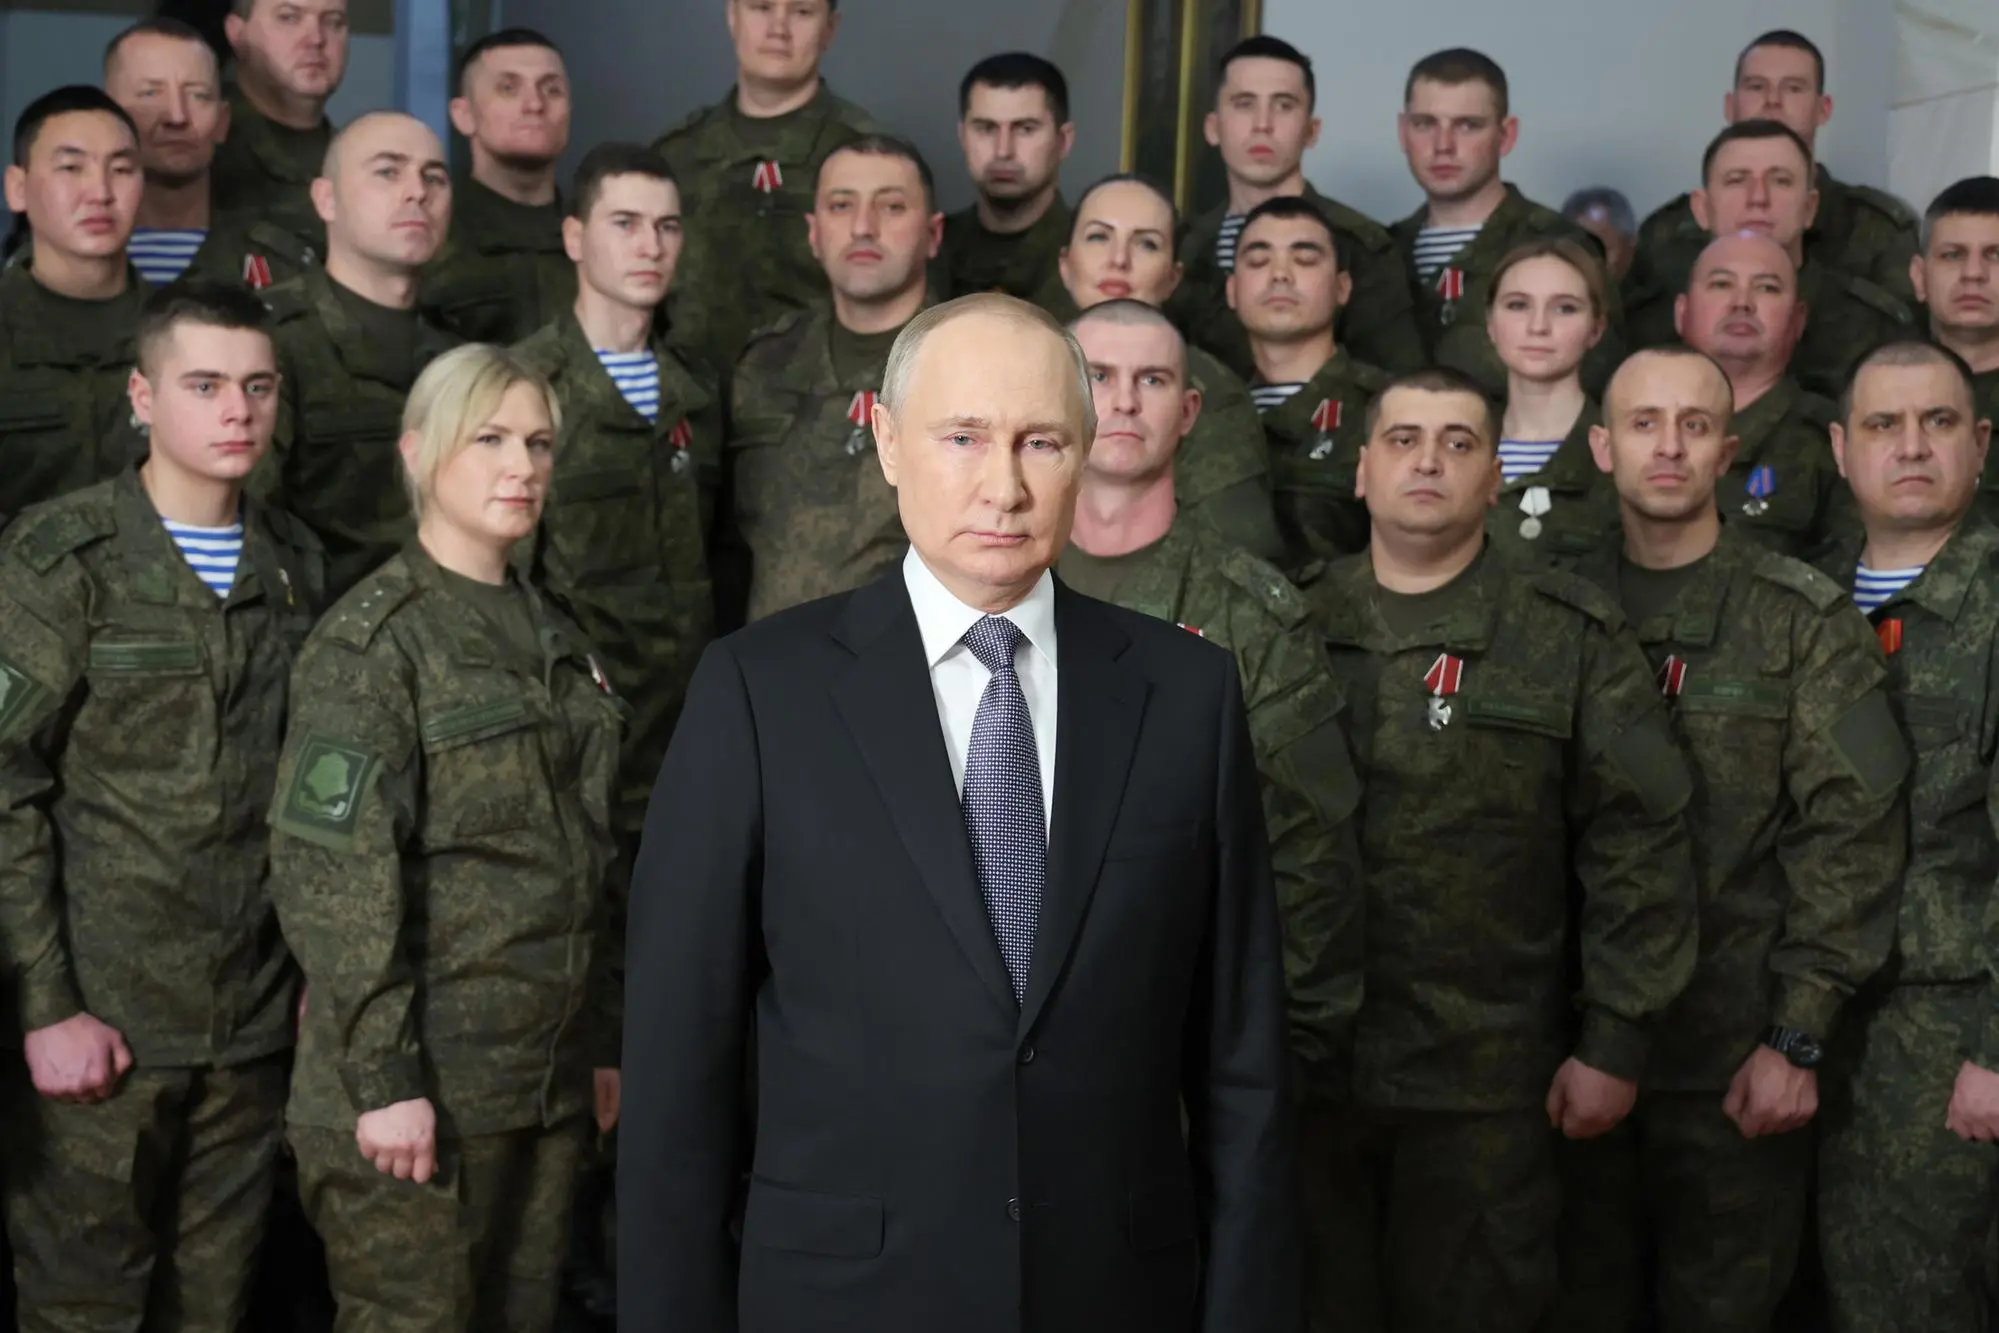 epa10384447 Russian President Vladimir Putin delivers his New Year address for Russians during his visit to the Southern Military District headquarters in Rostov on Don, Russia, 31 December 2022. EPA/MIKHAEL KLIMENTYEV/SPUTNIK/KREMLIN POOL